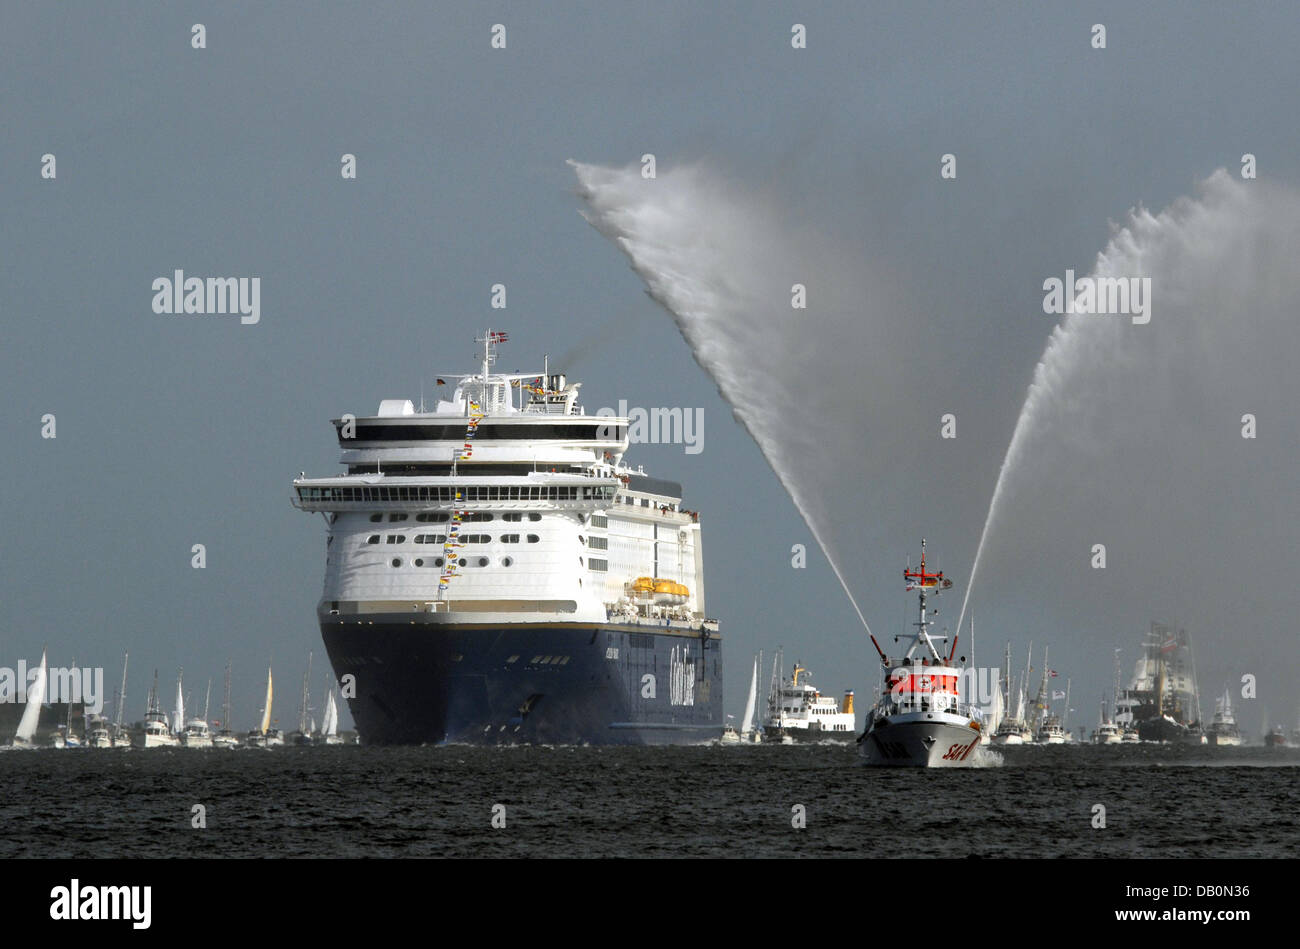 Shopping mall cruise ship MS Color Fantasy, Color Line shipping company,  Oslo, Norway Stock Photo - Alamy